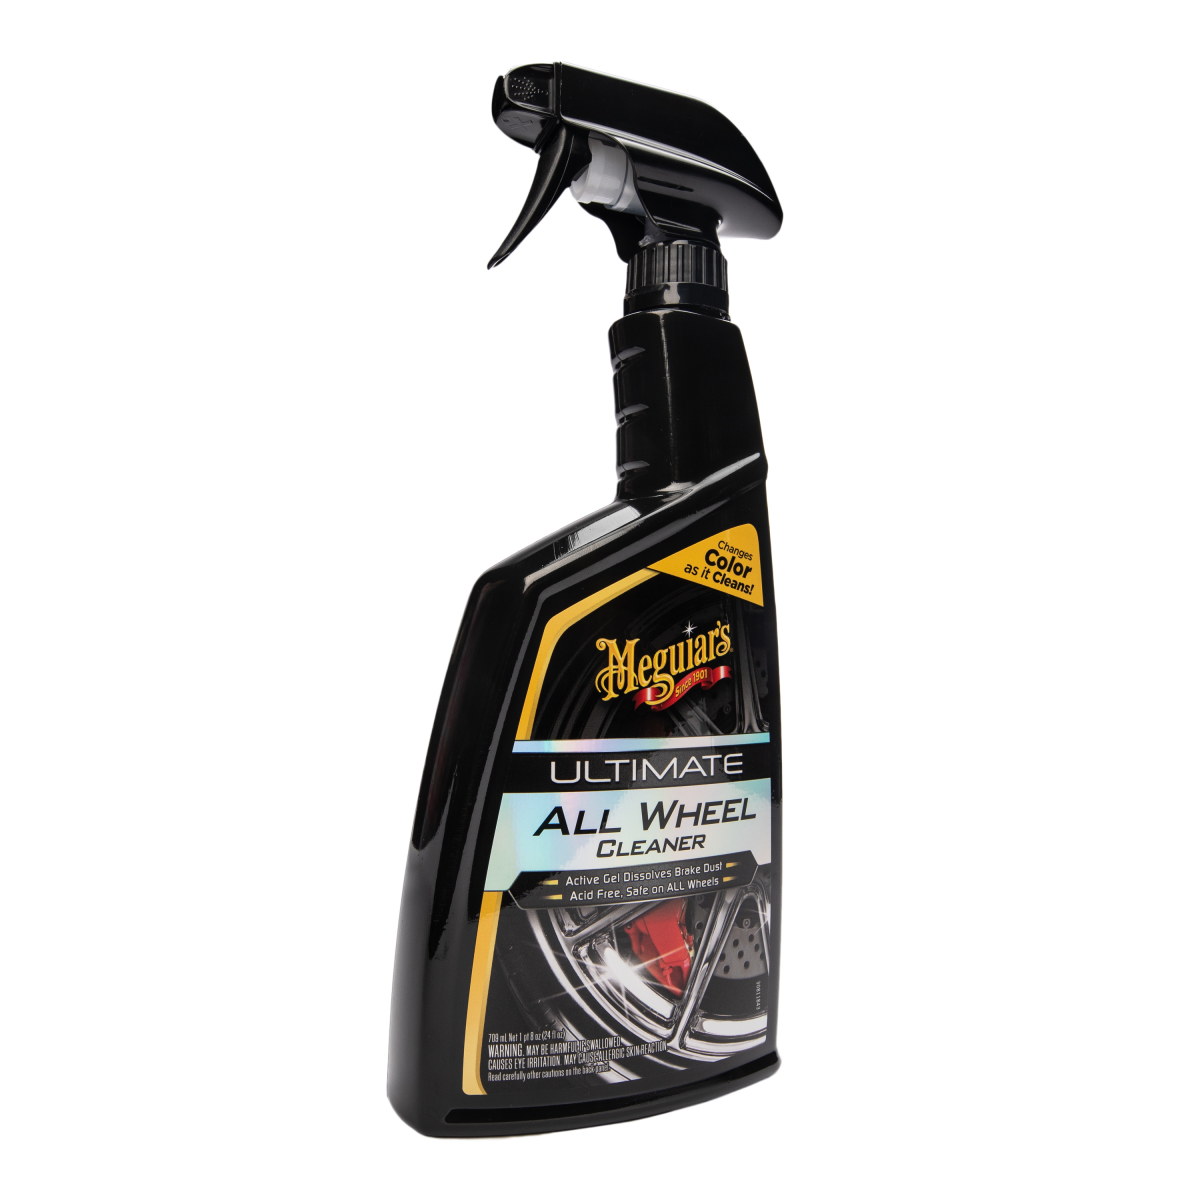  Meguiar's Ultimate All Wheel Cleaner